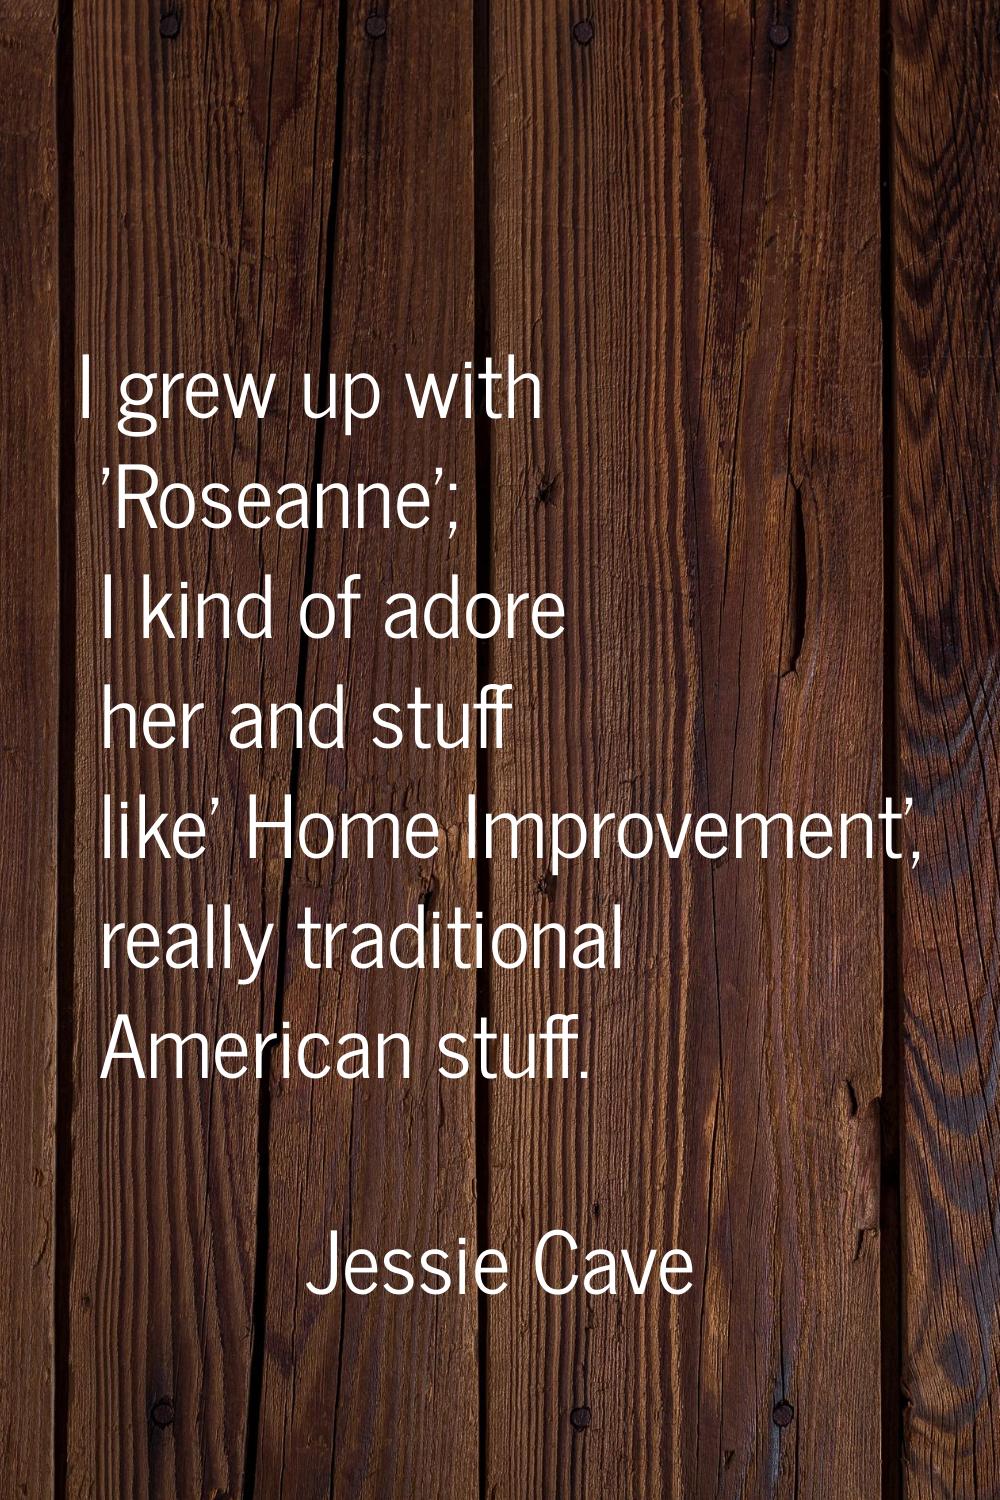 I grew up with 'Roseanne'; I kind of adore her and stuff like' Home Improvement', really traditiona